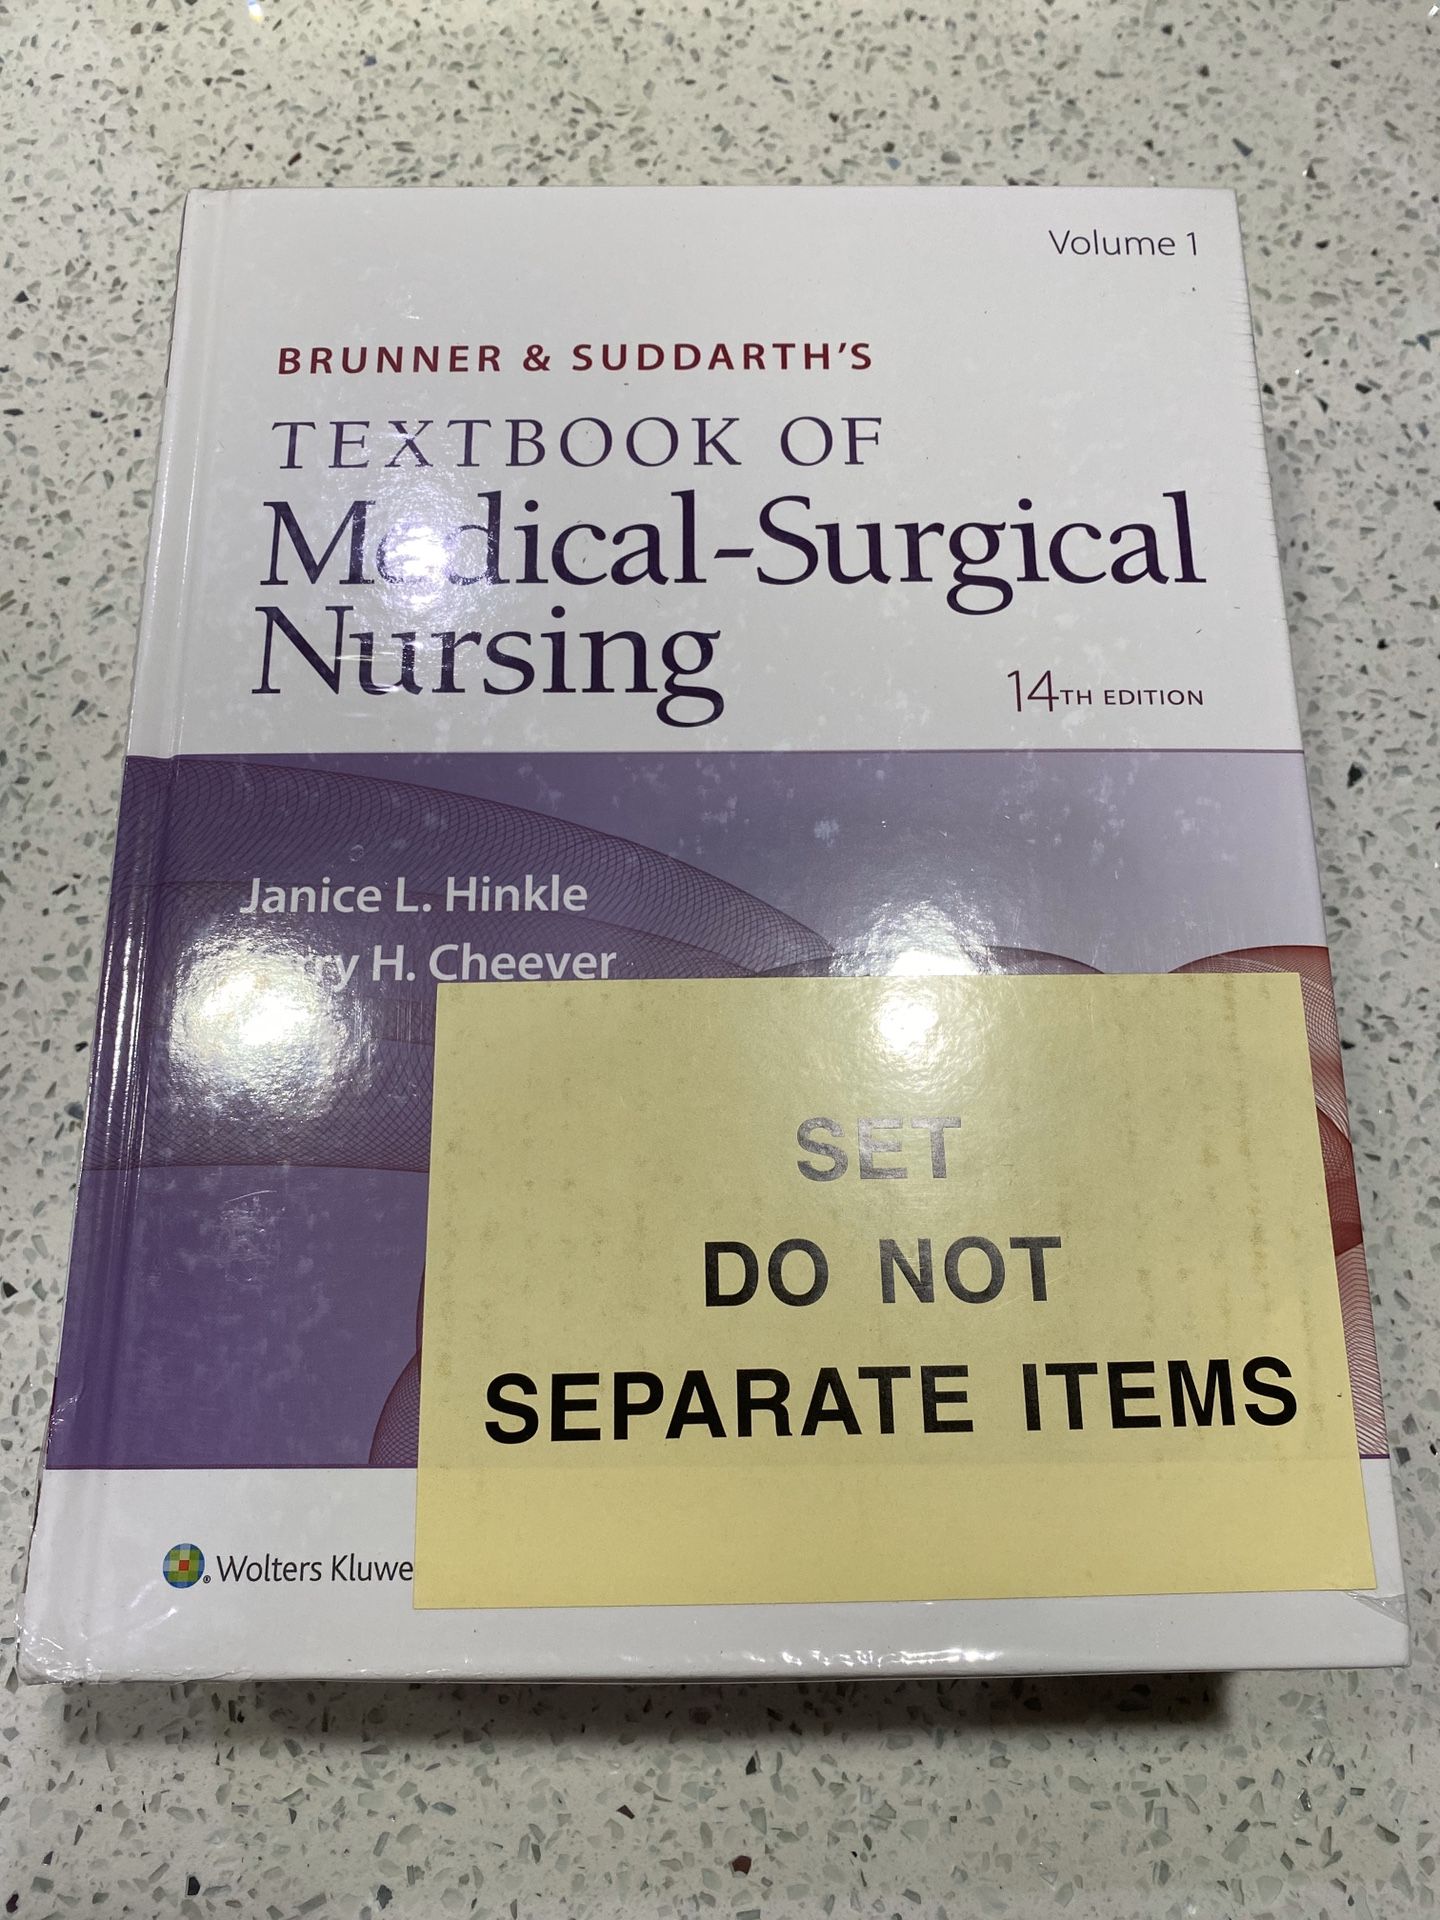 Brunner & Suddarth's Textbook of Medical-Surgical Nursing 14th Edition